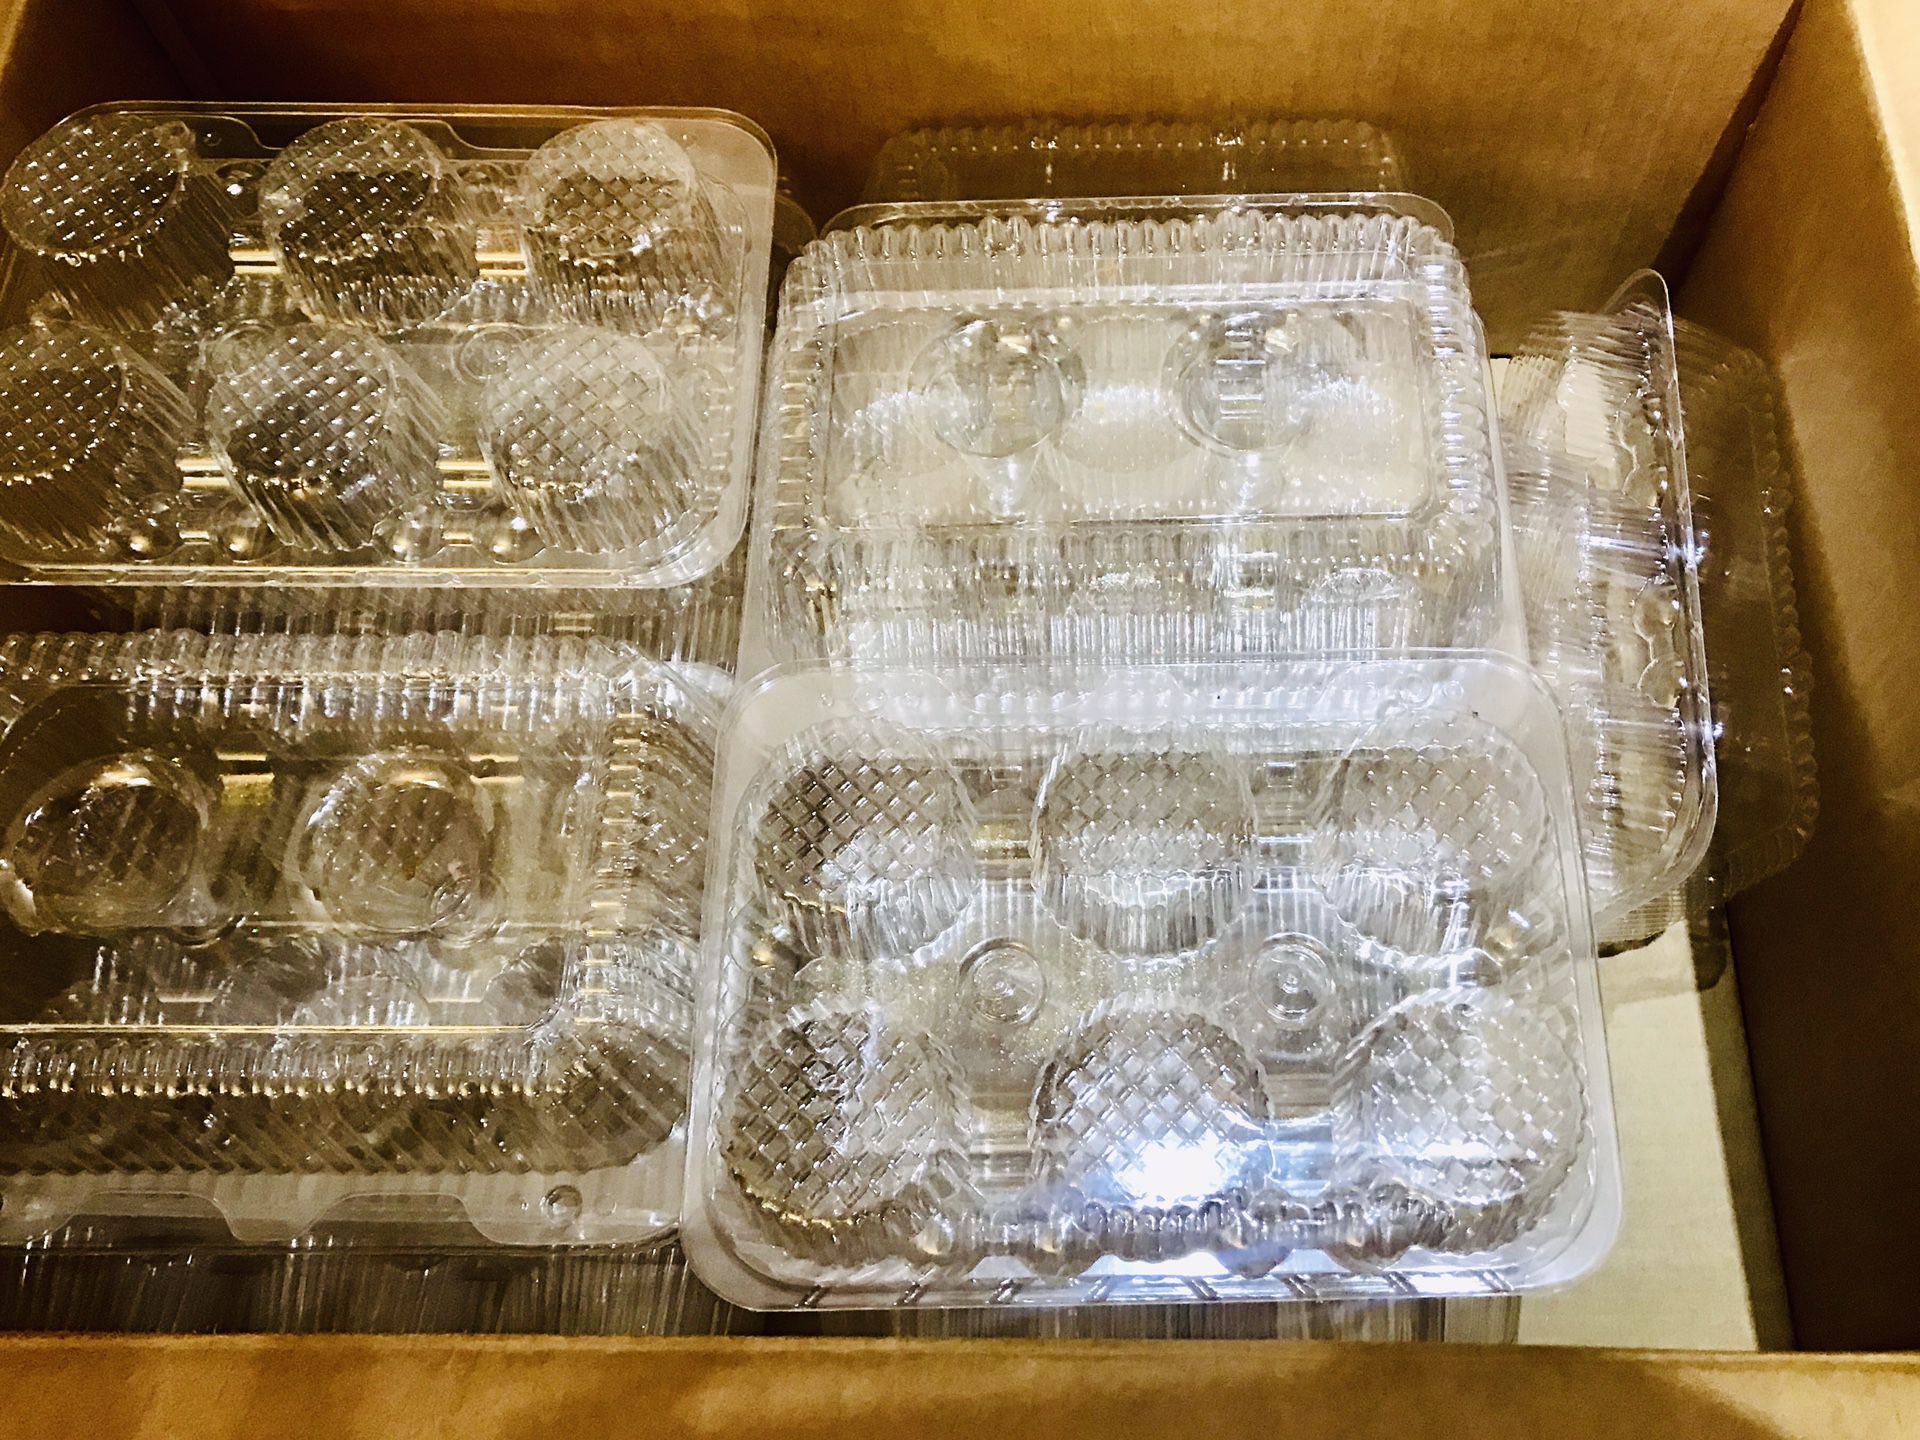 Box of cupcake cases. Free!